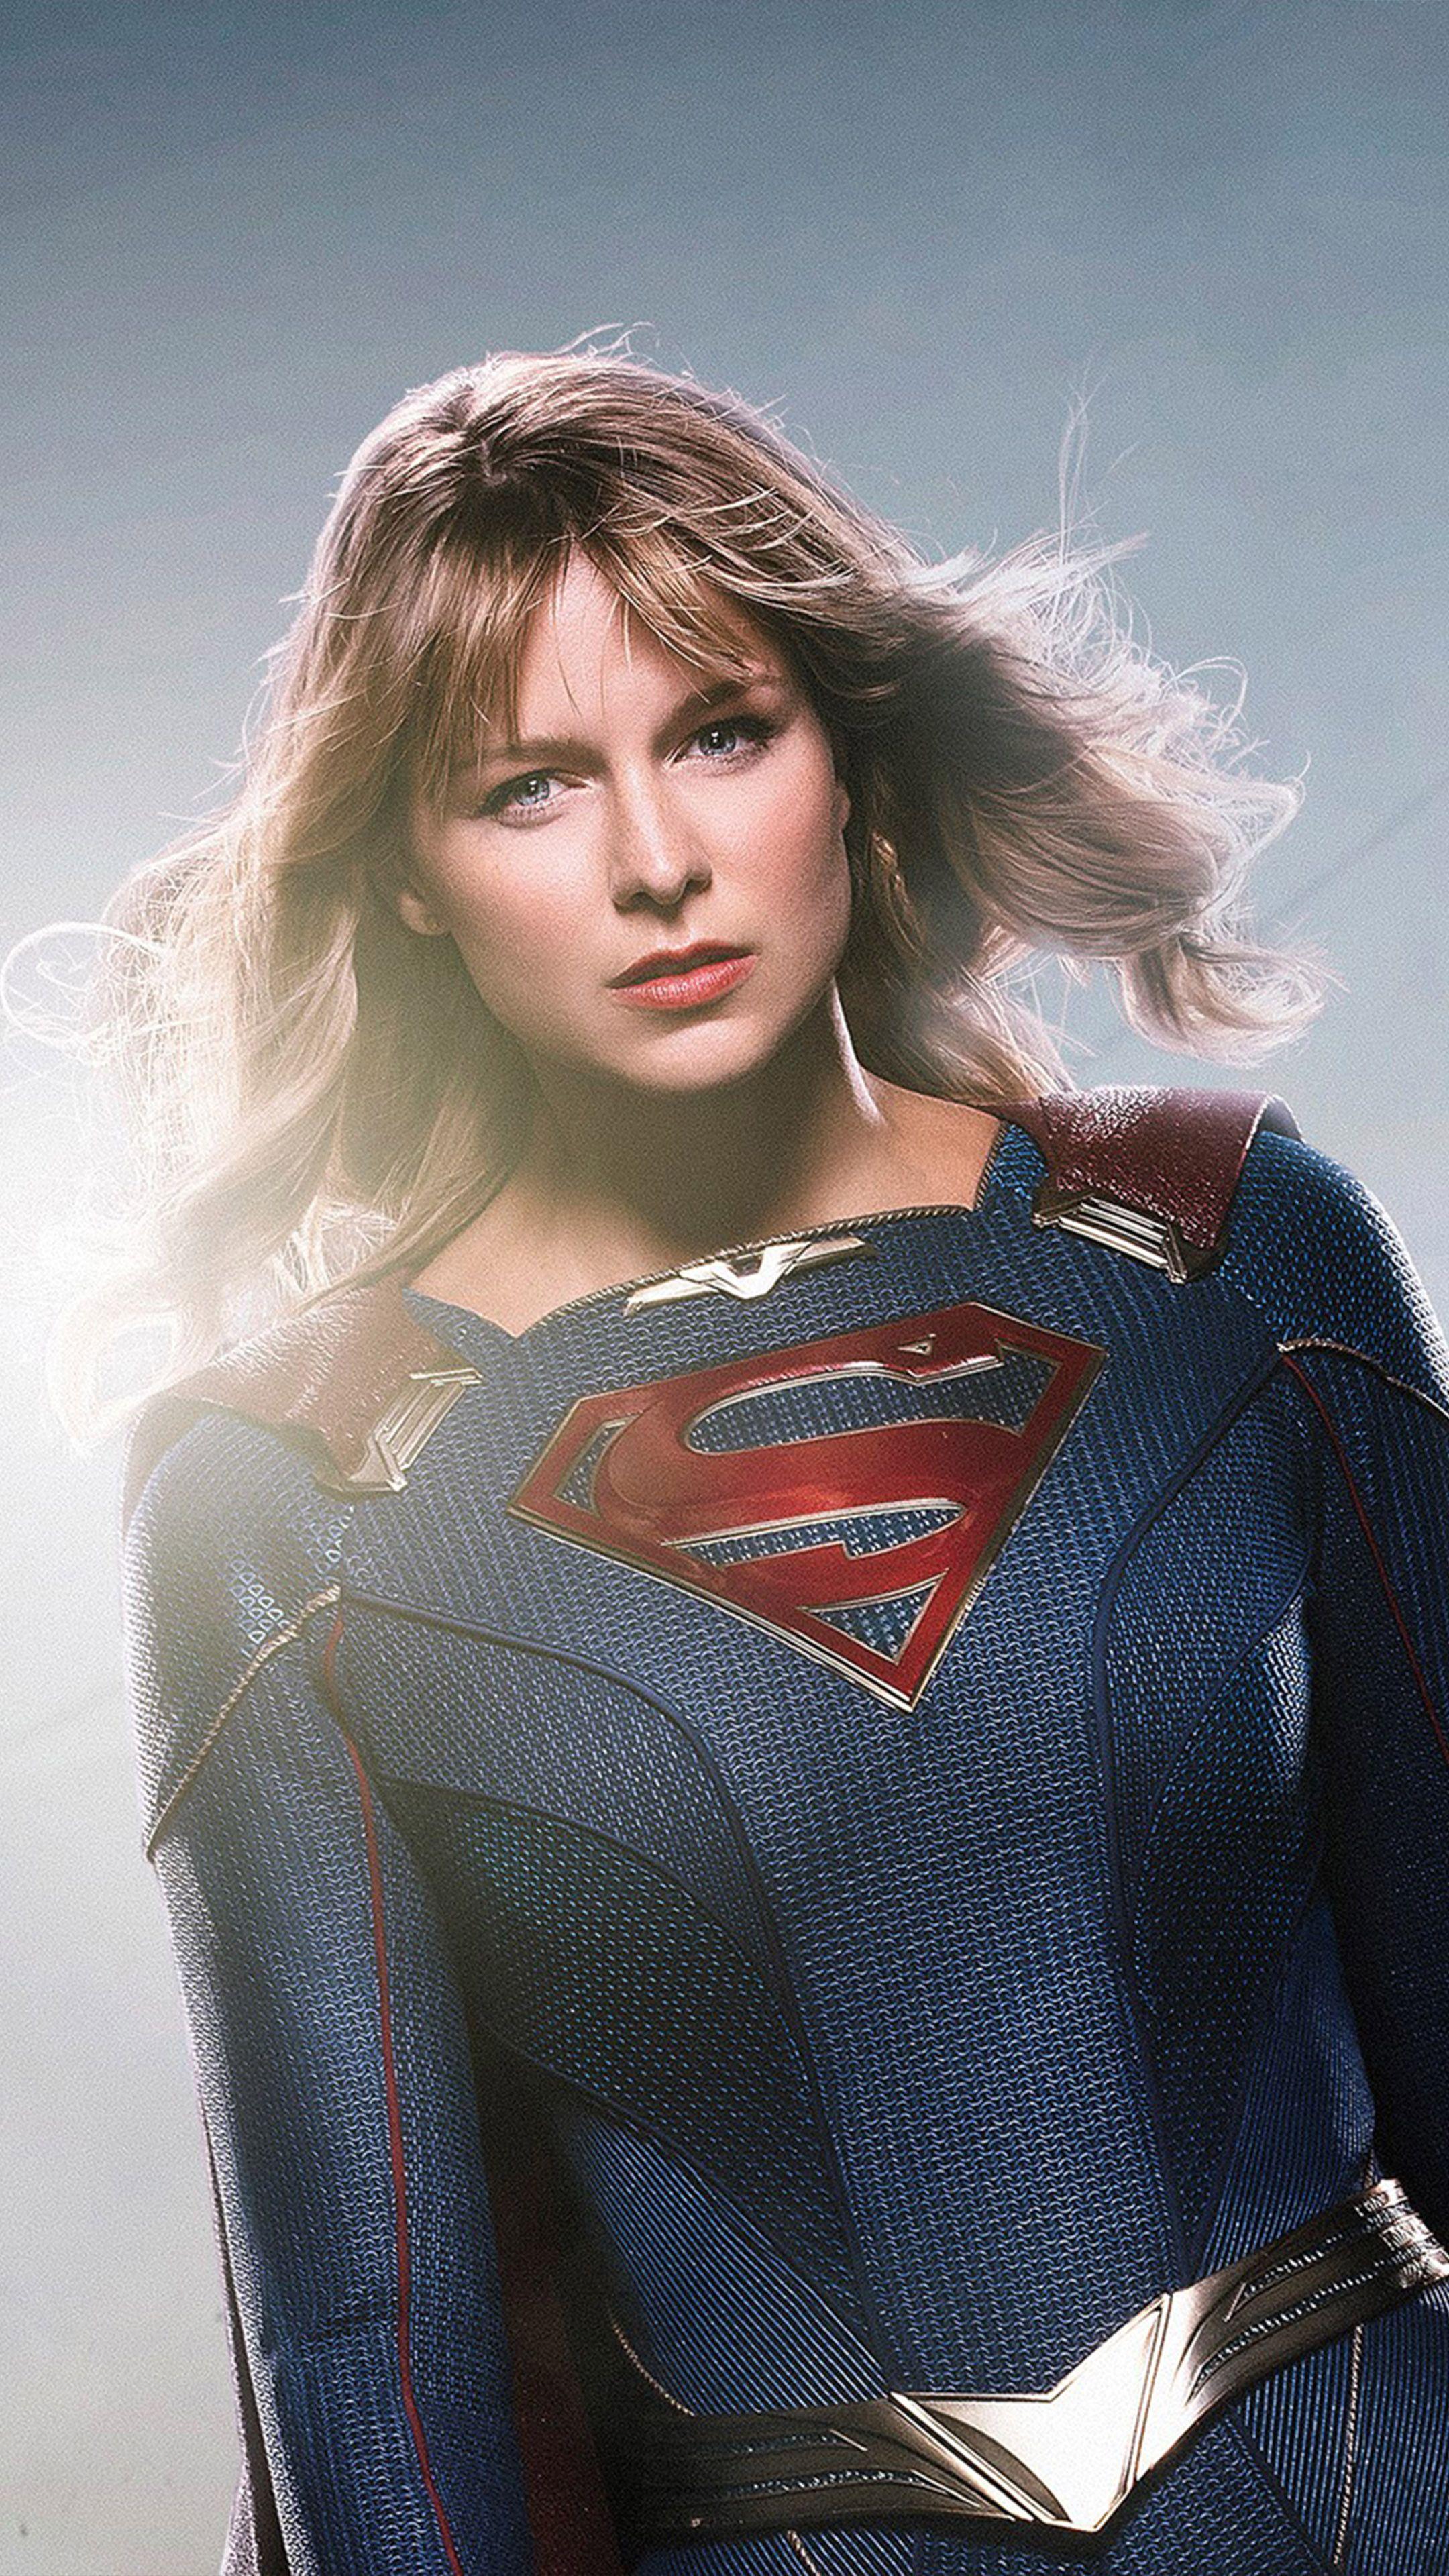 Supergirl 4k Wallpapers Top Free Supergirl 4k Backgrounds Wallpaperaccess